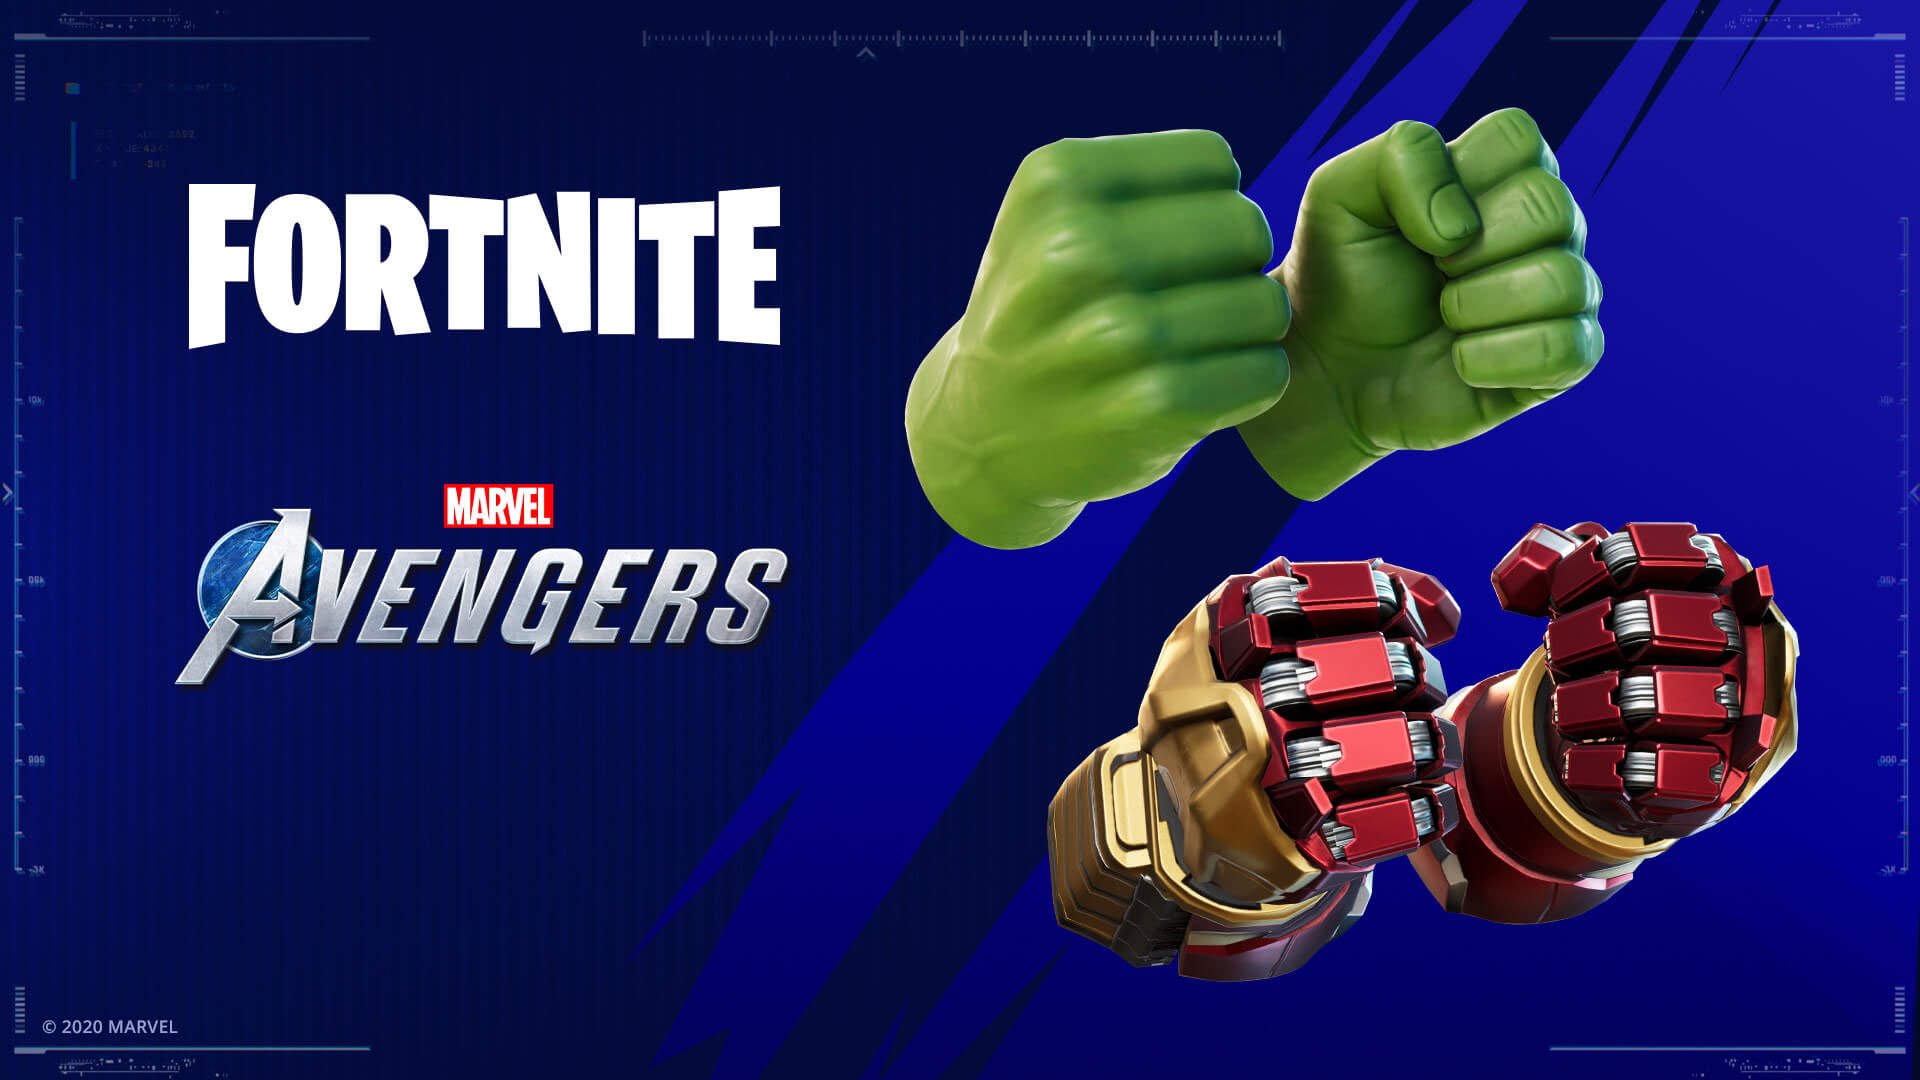 Get Fortnite S Hulk Smashers Pickaxe For Free By Participating In The Marvel Avengers Beta Pro Game Guides - roblox avengers endgame event leaks youtube